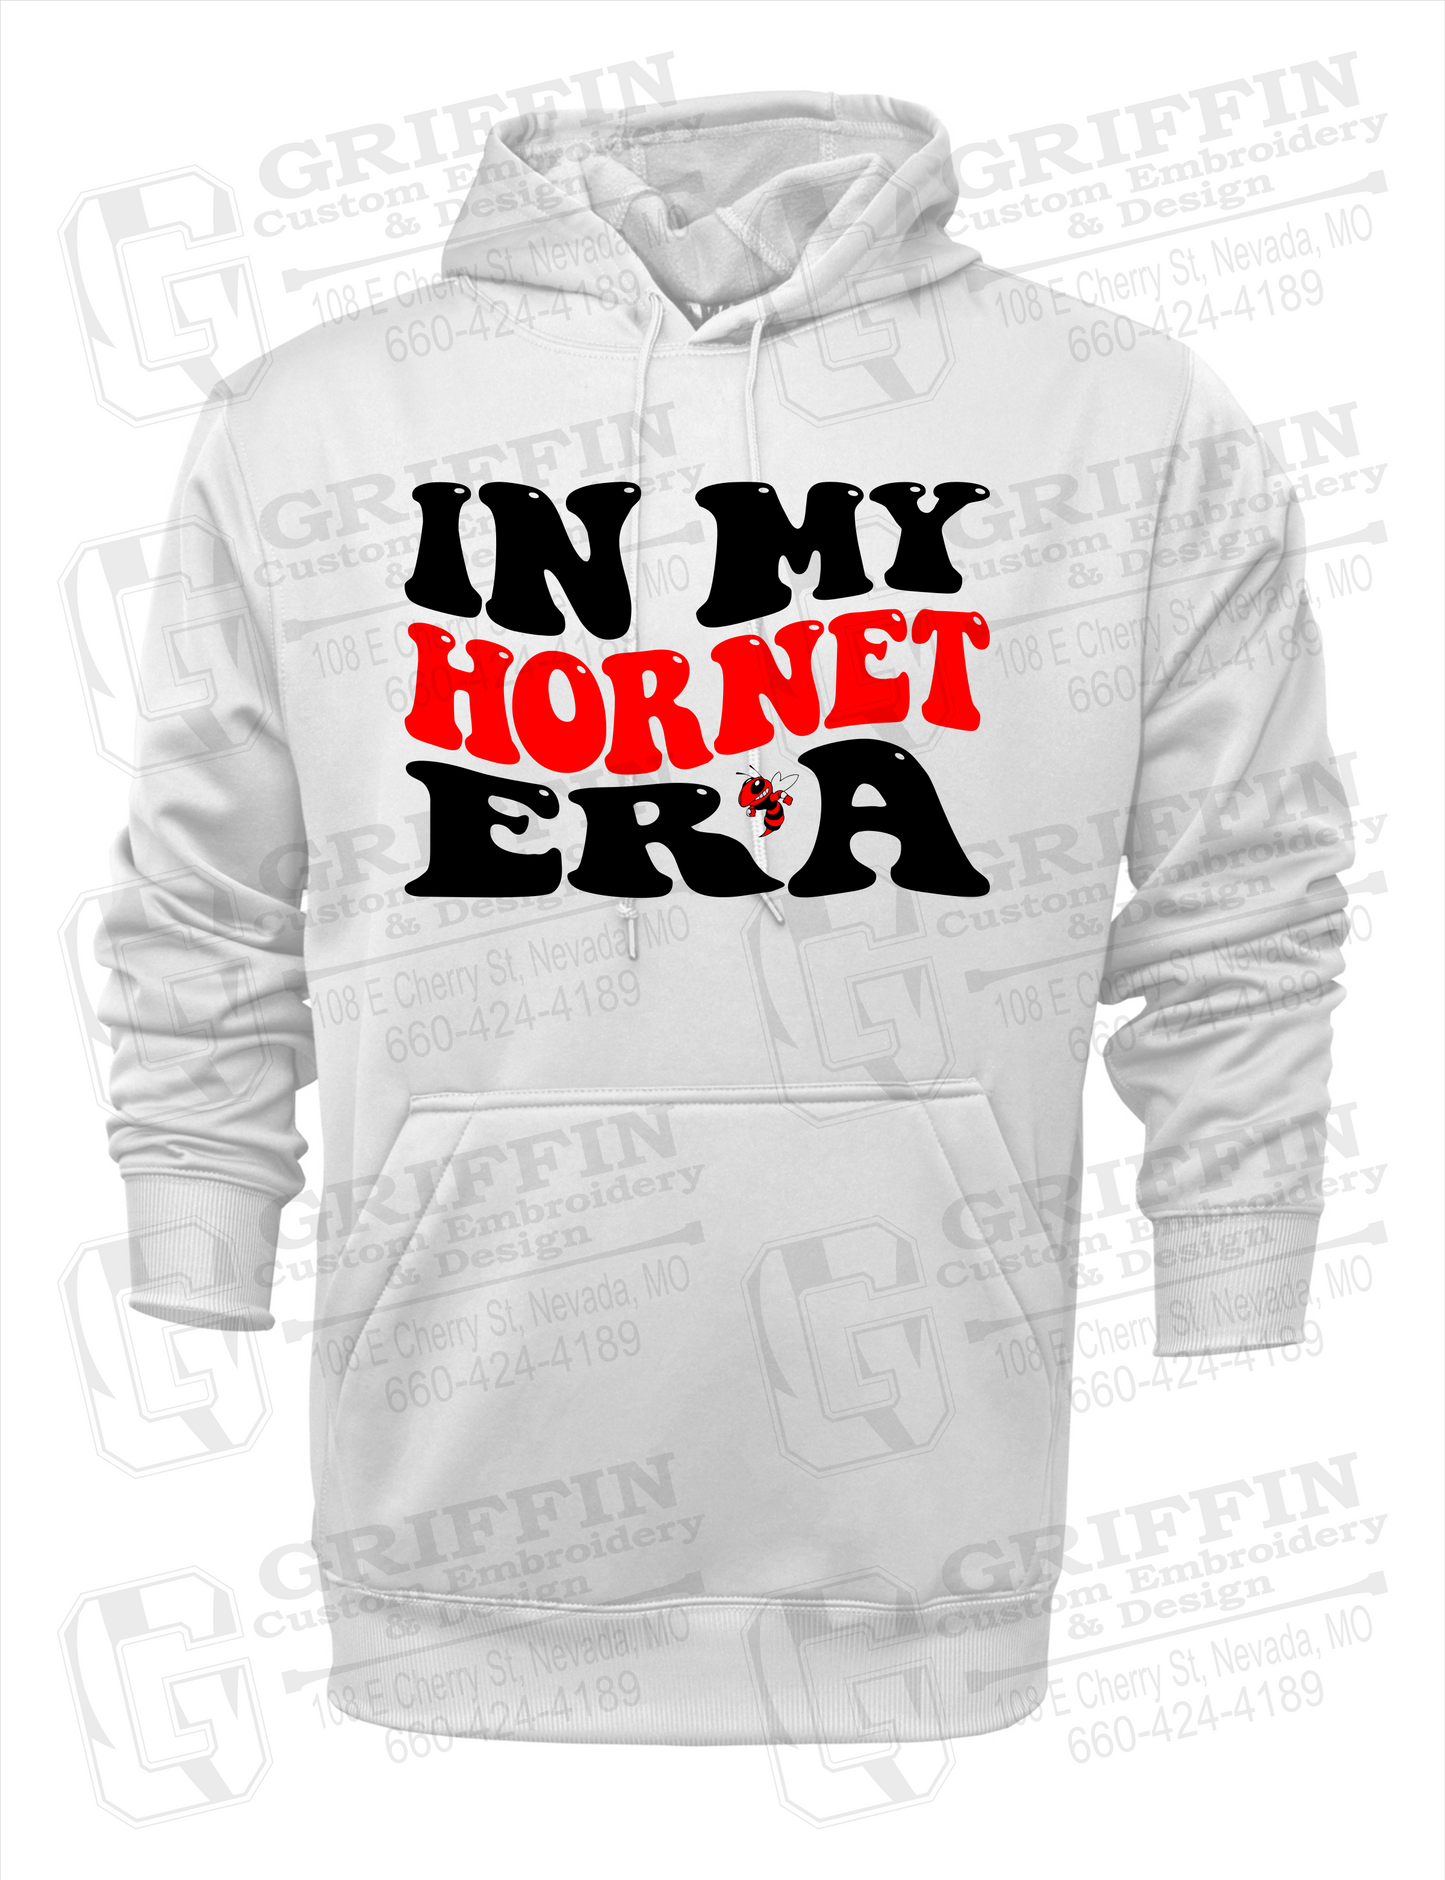 Hume Hornets 23-D Hoodie